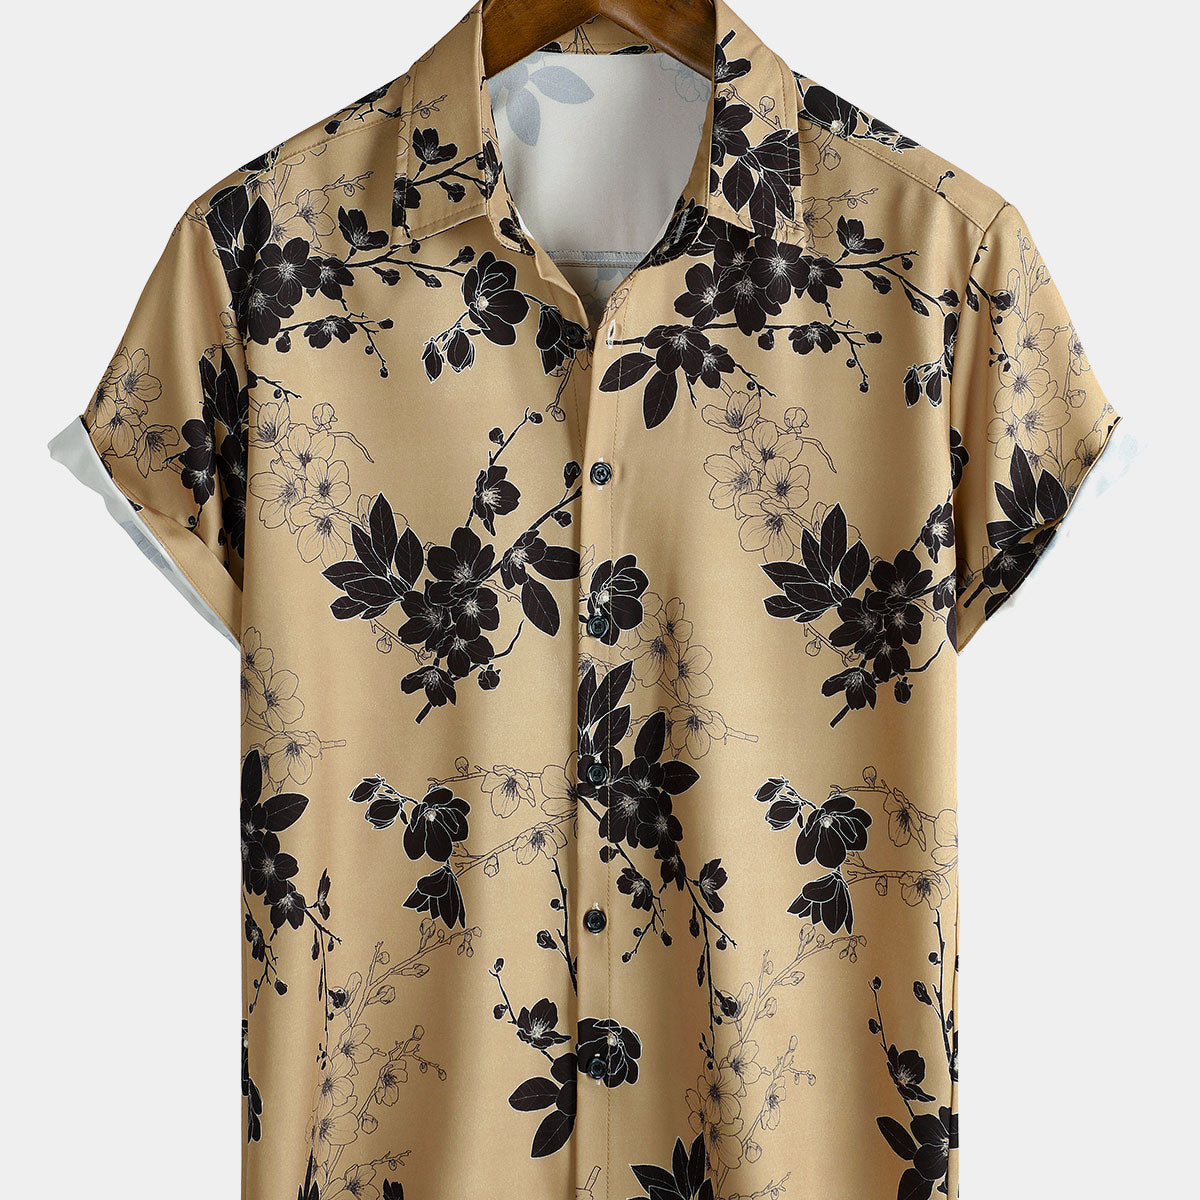 Men's Summer Casual Floral Holiday Short Sleeve Button Up Shirt